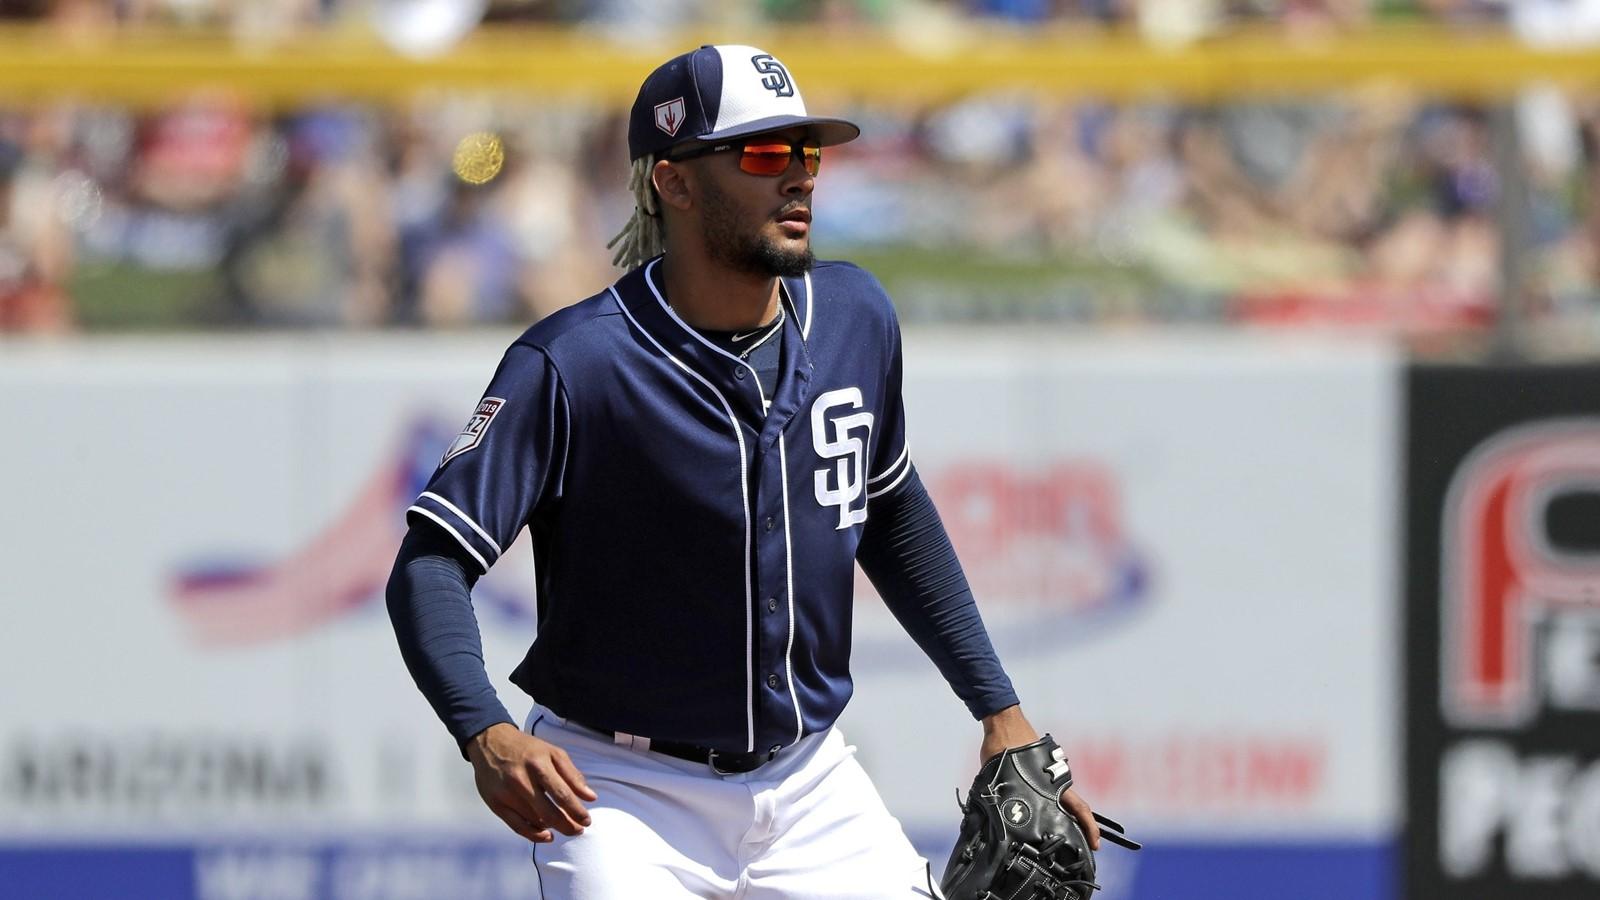 Tati' could make a run to join Padres for opener